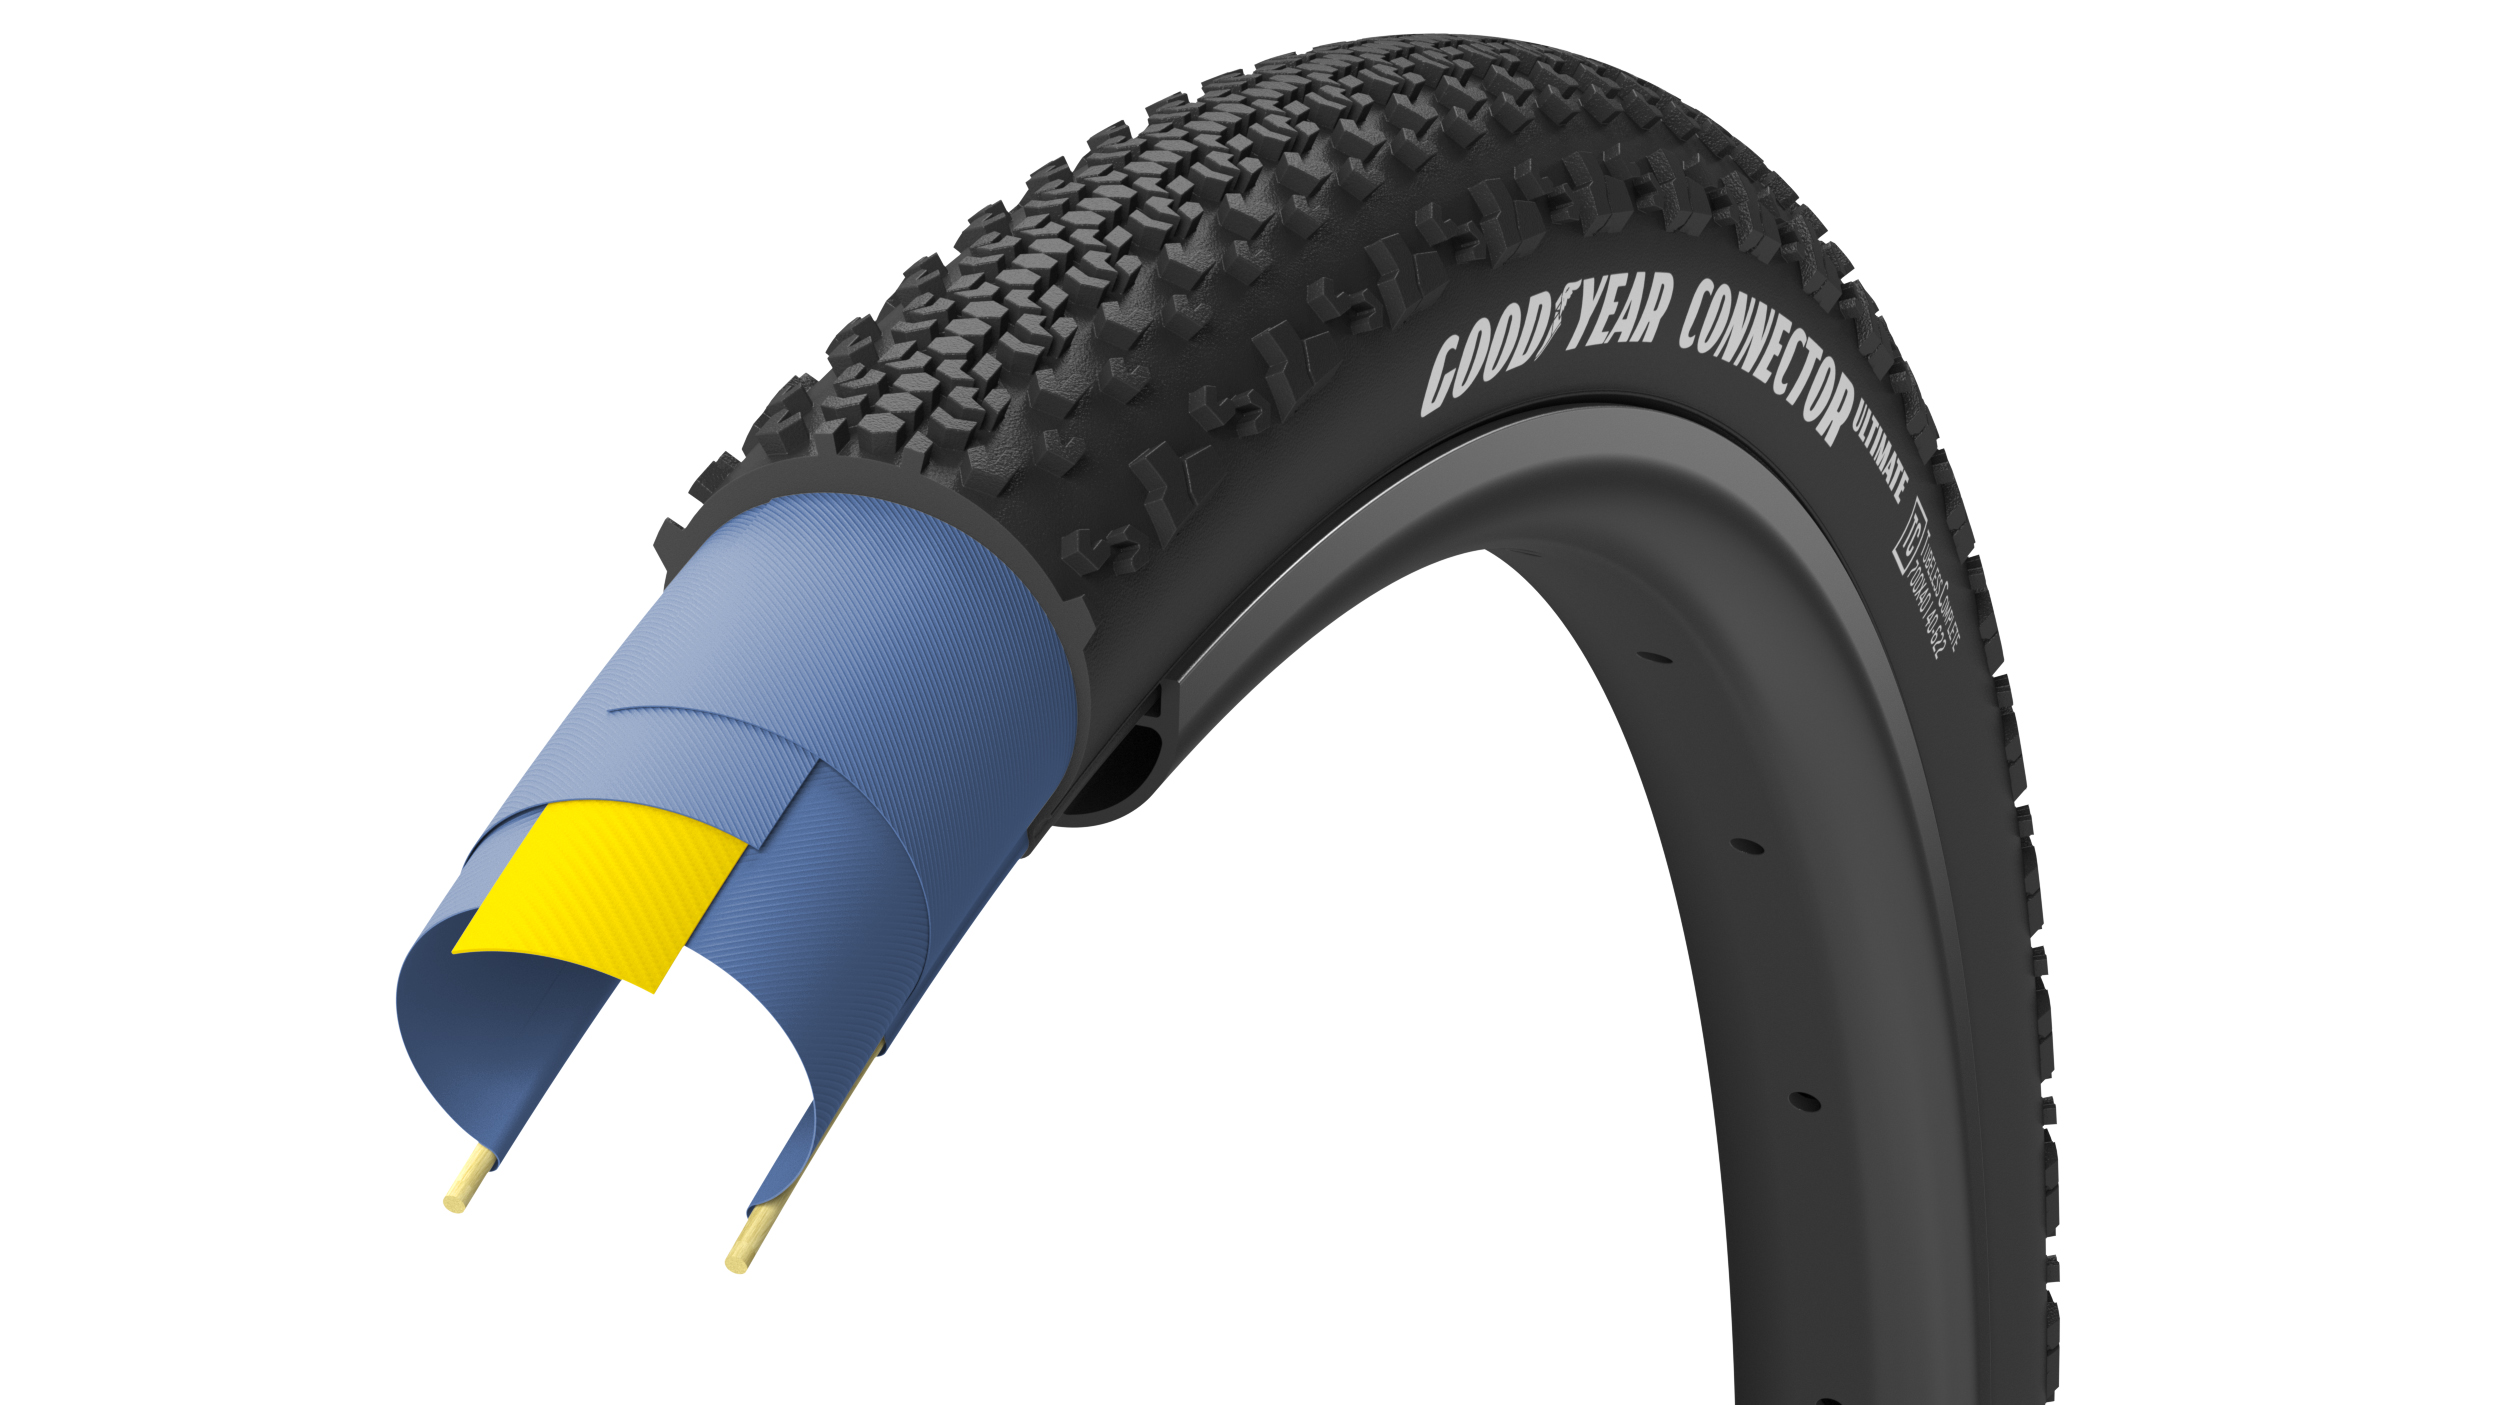 Покрышка 700x50 (50-622) GoodYear CONNECTOR tubeless complete, folding, black, 120tpi фото 